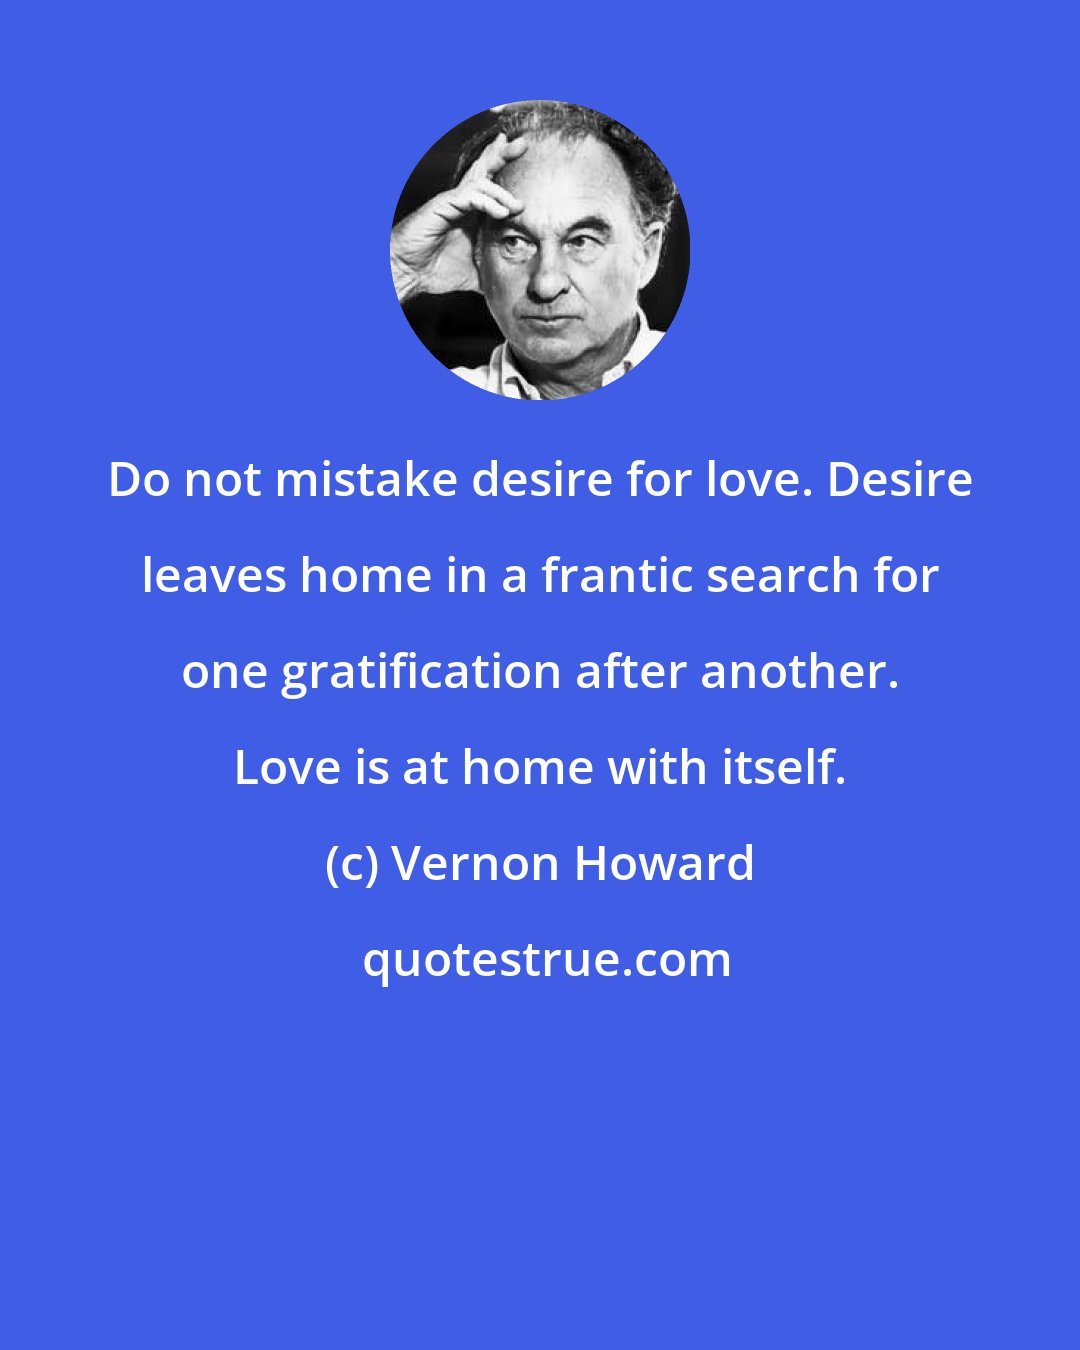 Vernon Howard: Do not mistake desire for love. Desire leaves home in a frantic search for one gratification after another. Love is at home with itself.